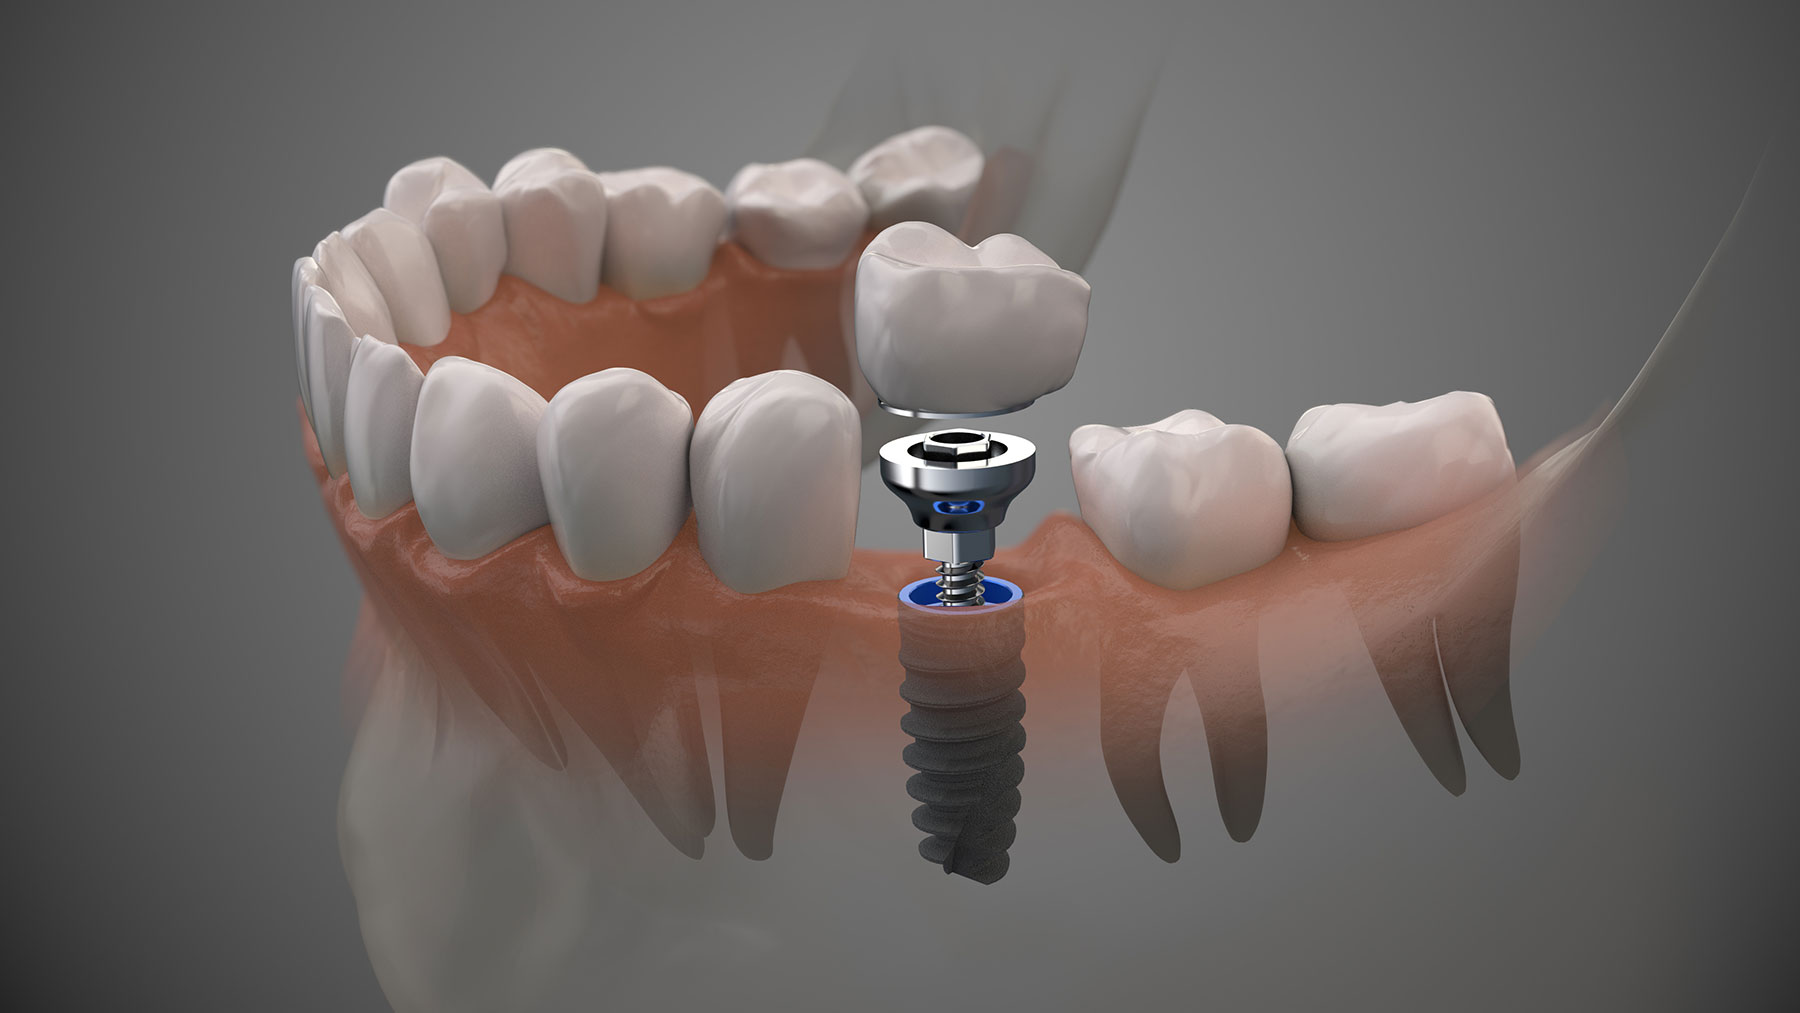 3D rendering of how a dental implant is inserted into the gumline.